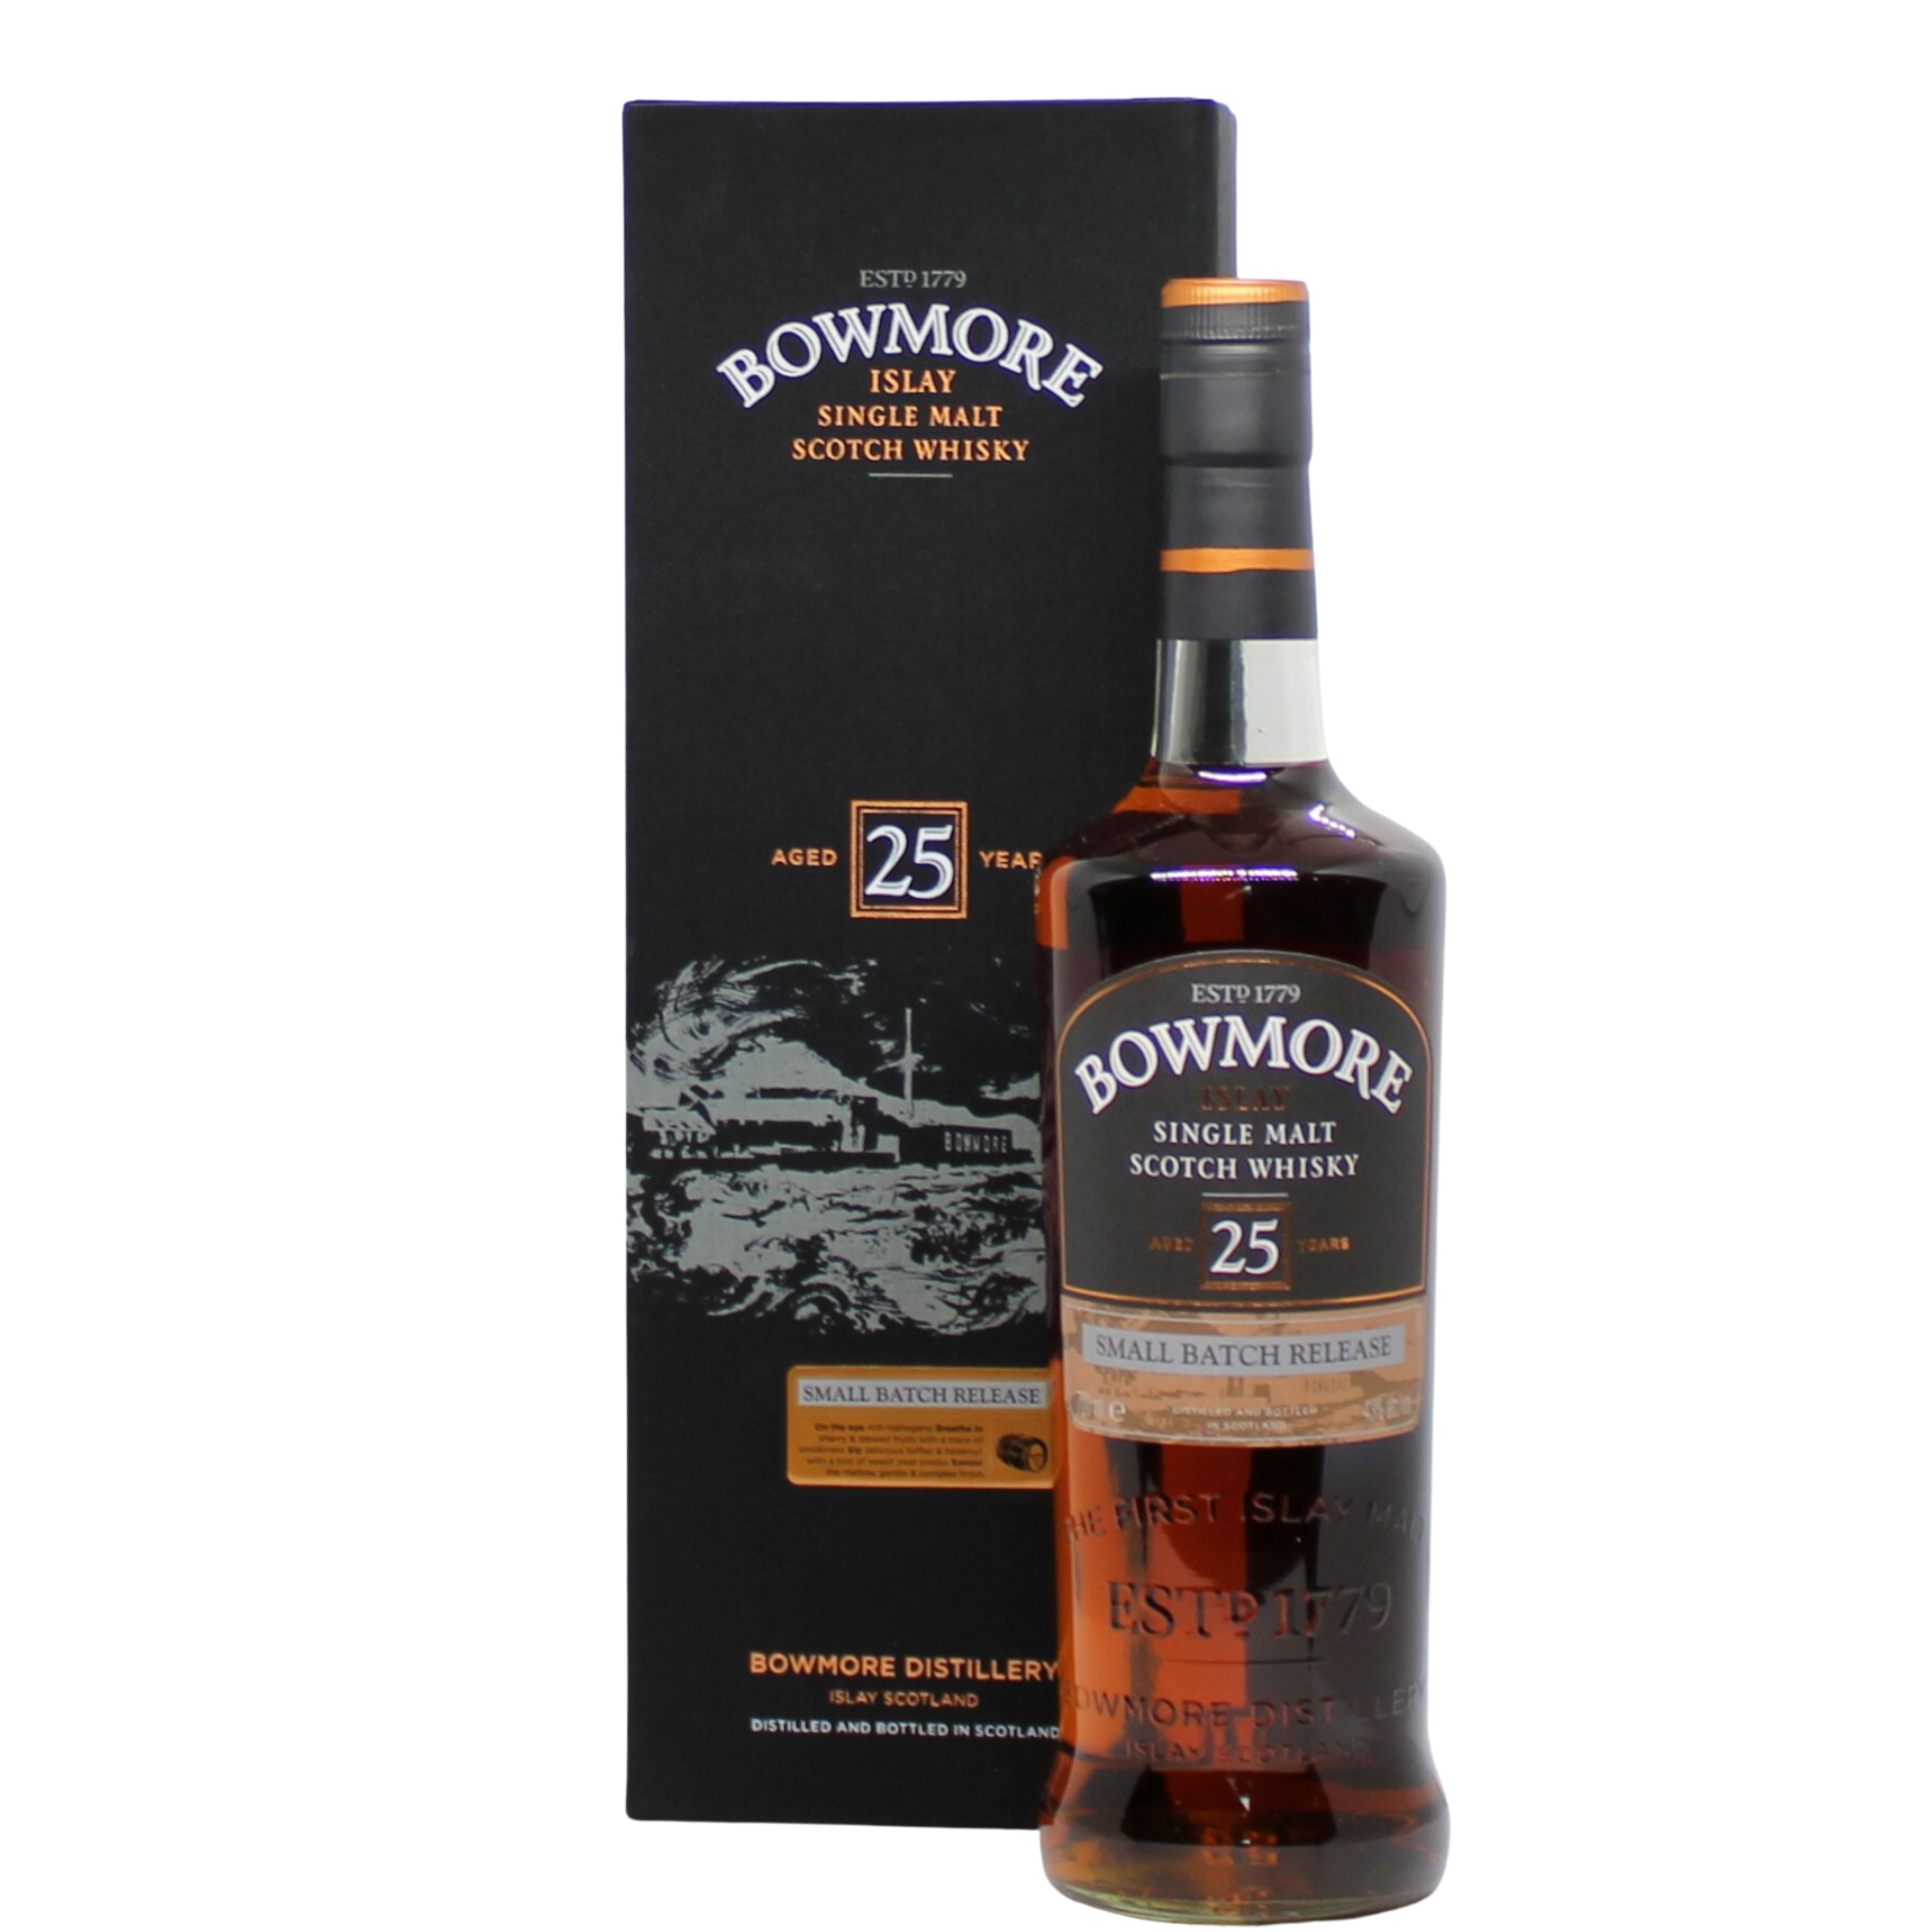 An excellent aged Single Malt Whisky for 25 Years in American Bourbon and Spanish Sherry Casks. A very well balanced bottling from the Bowmore Distillery, with notes of mandarin peel combined with dry fruit richness and subtle peat smoke